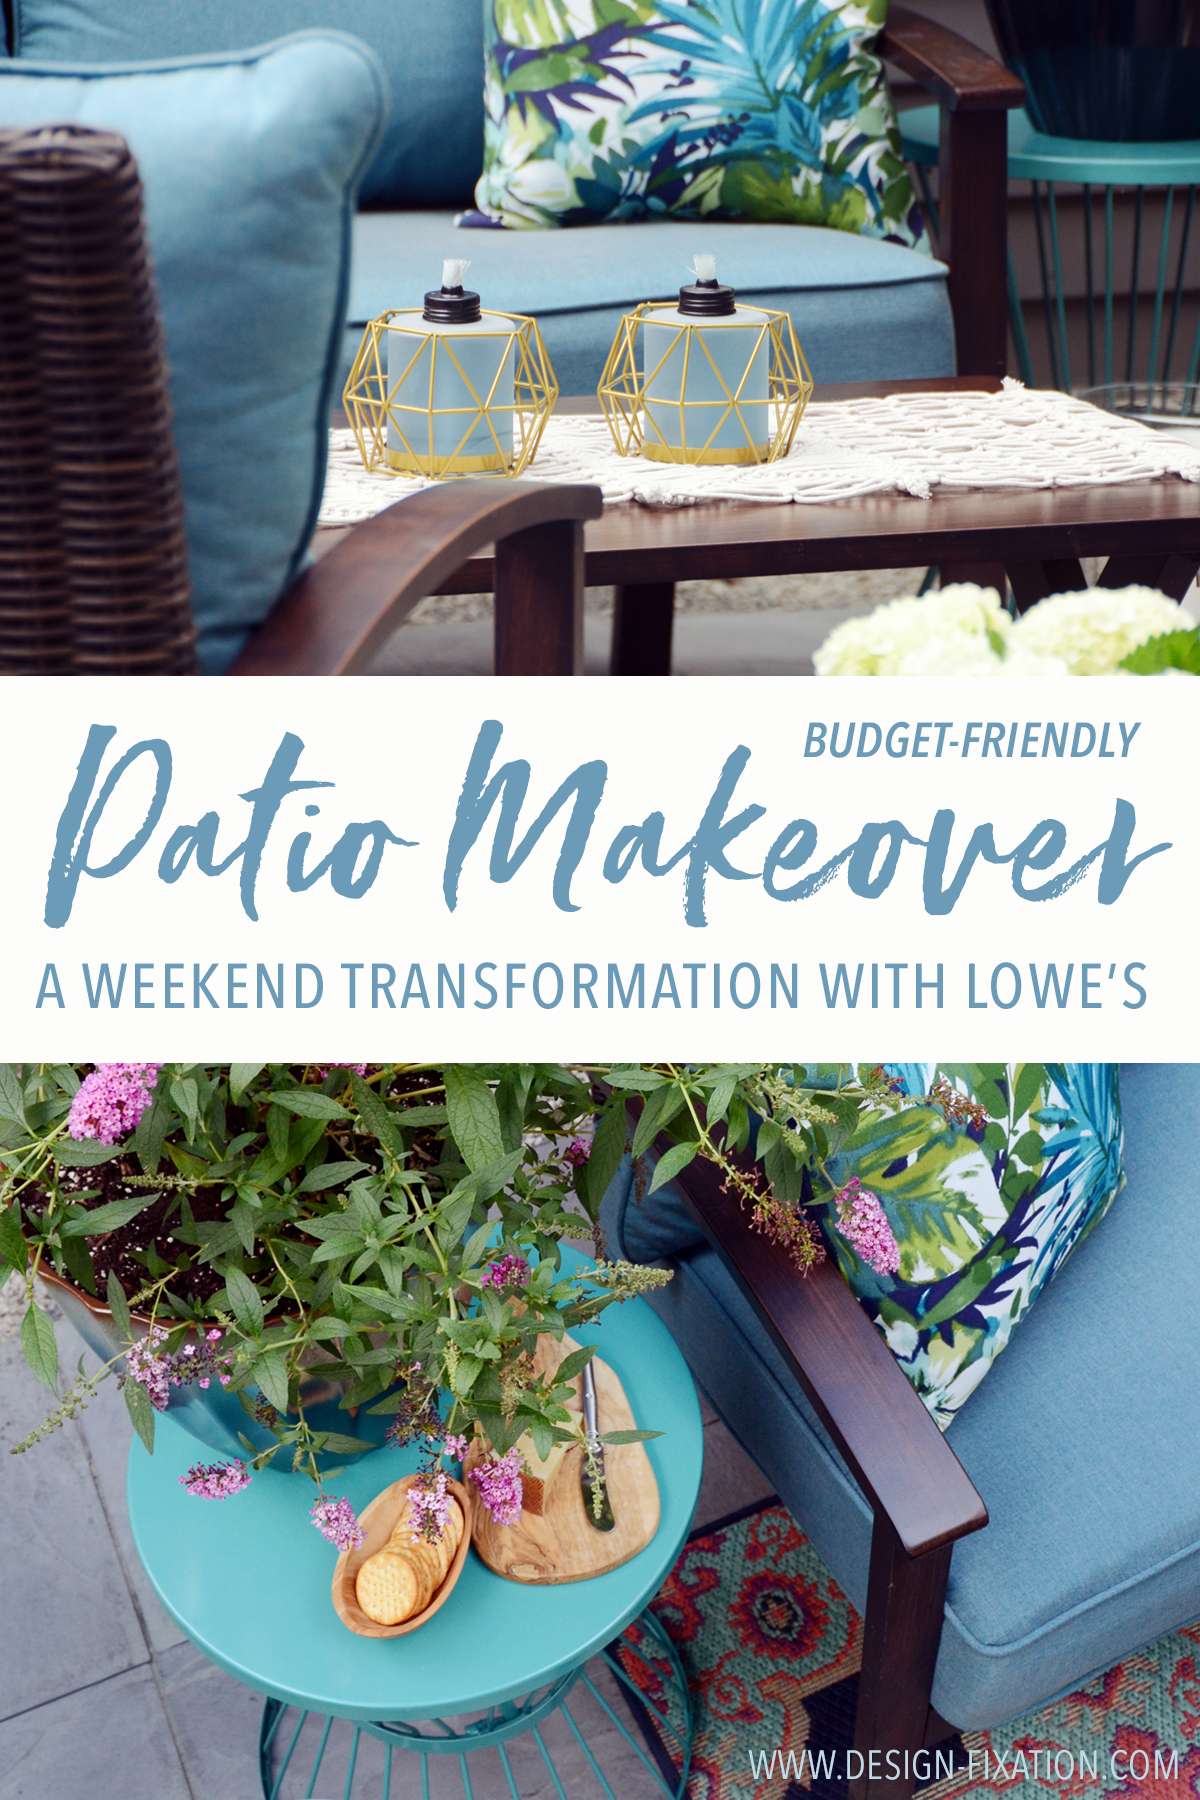 Our Budget Patio Makeover: From Patchy Grass To Chic Retreat /// By Design Fixation #patio #decor #backyard